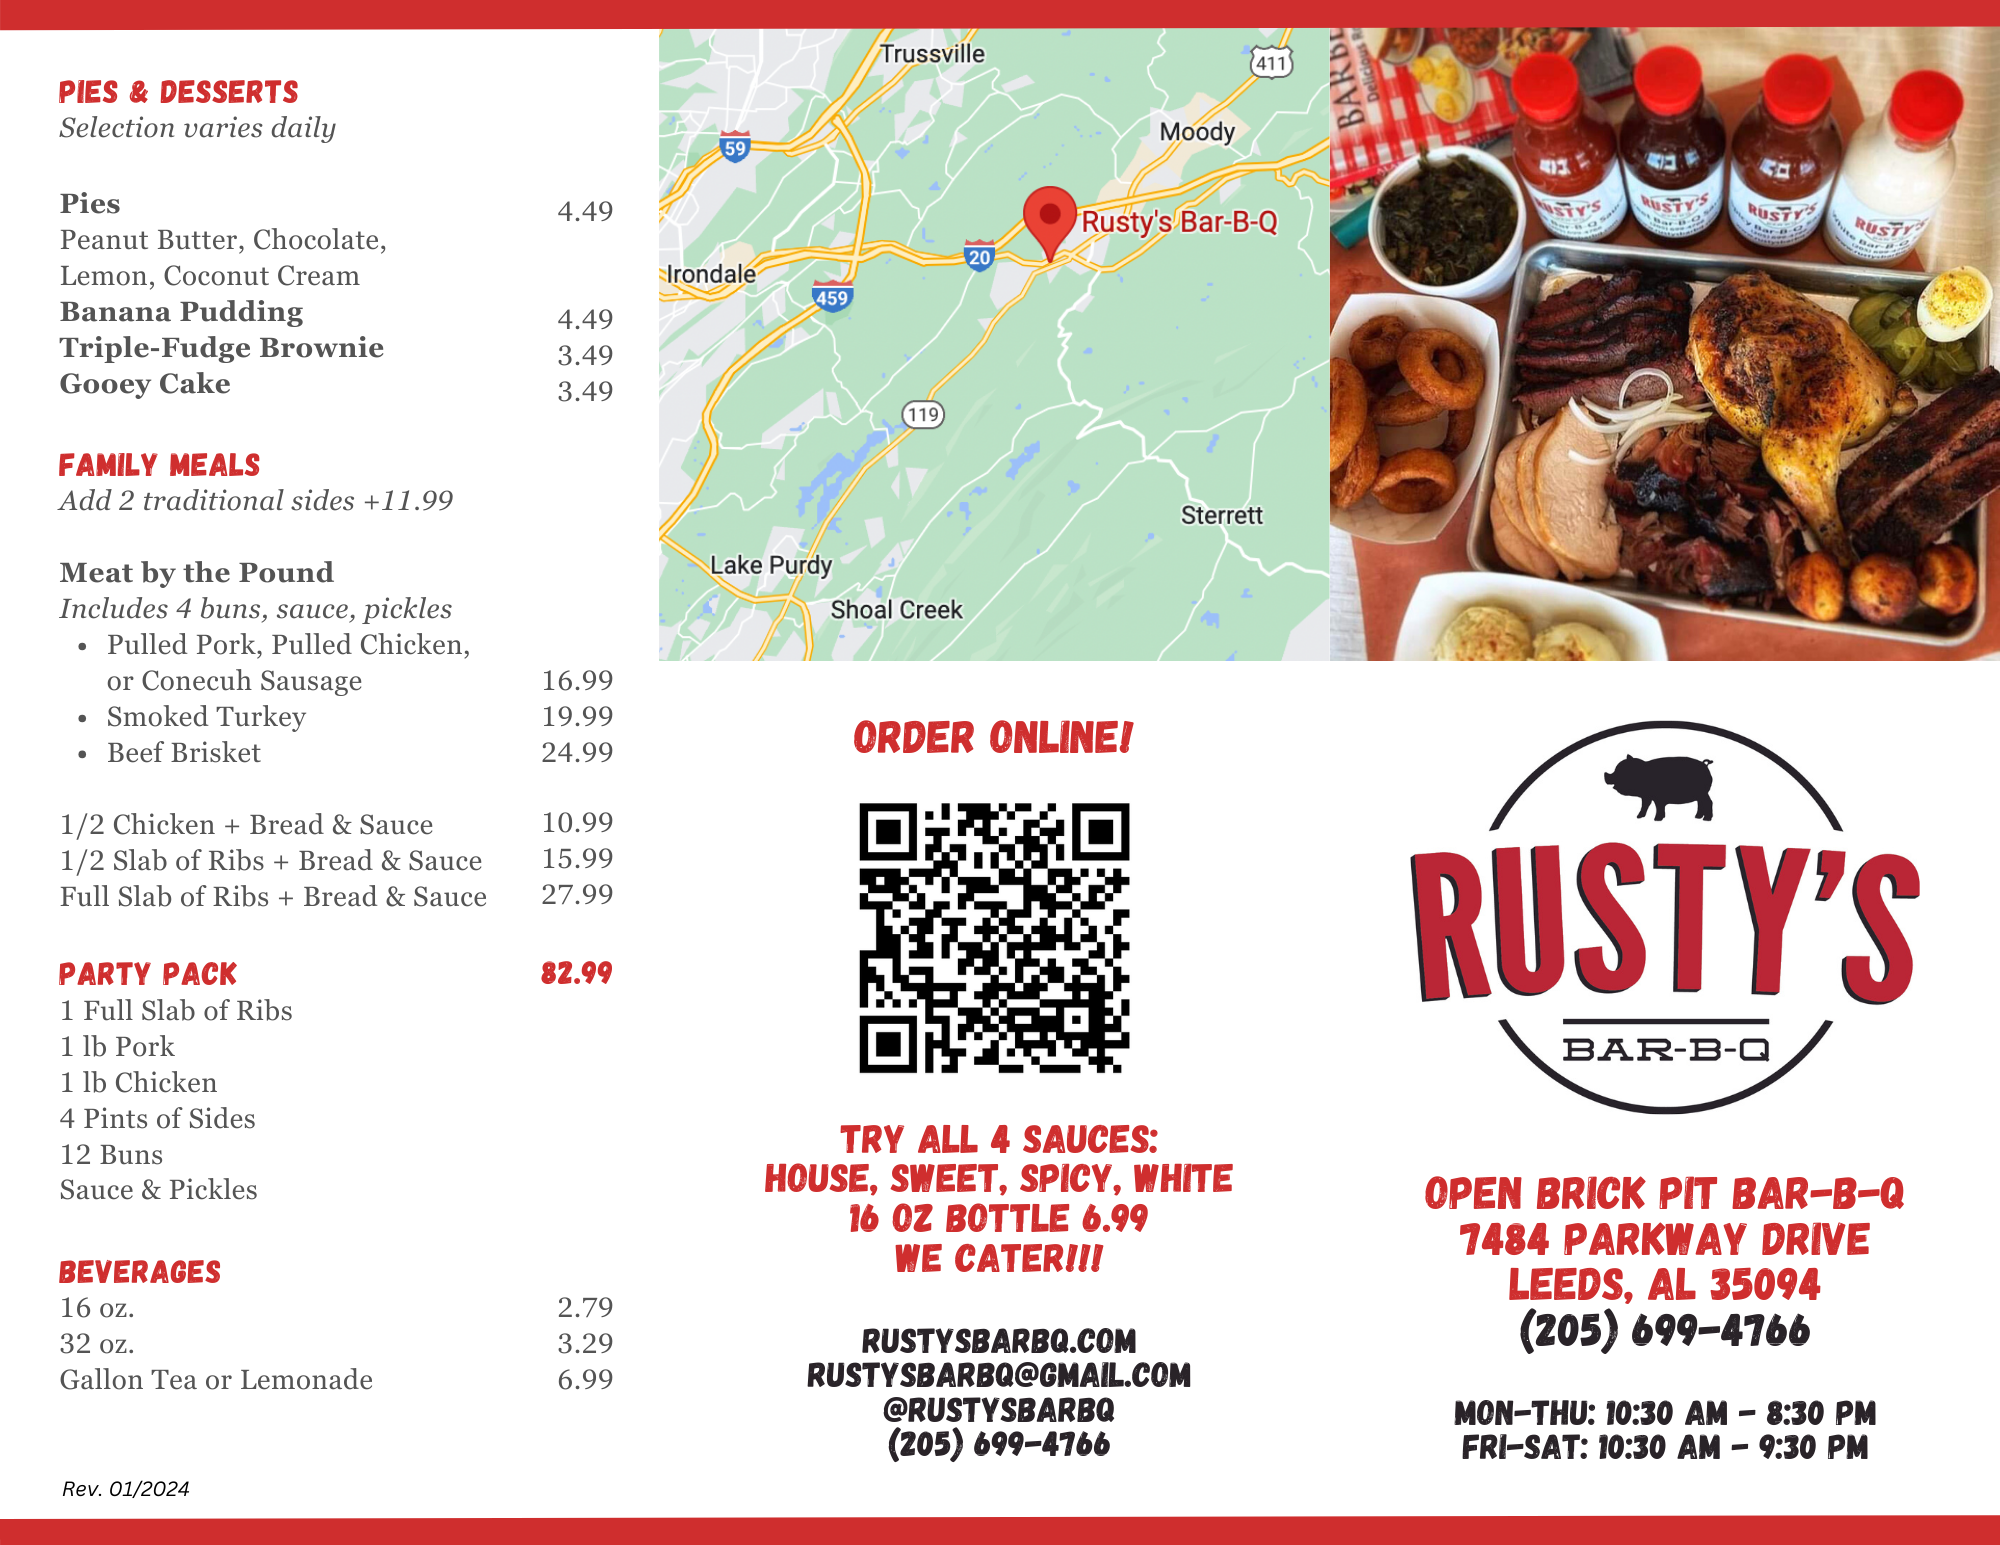 Menu - page 1 If you need assistance with ordering, call us at 205-699-4766.